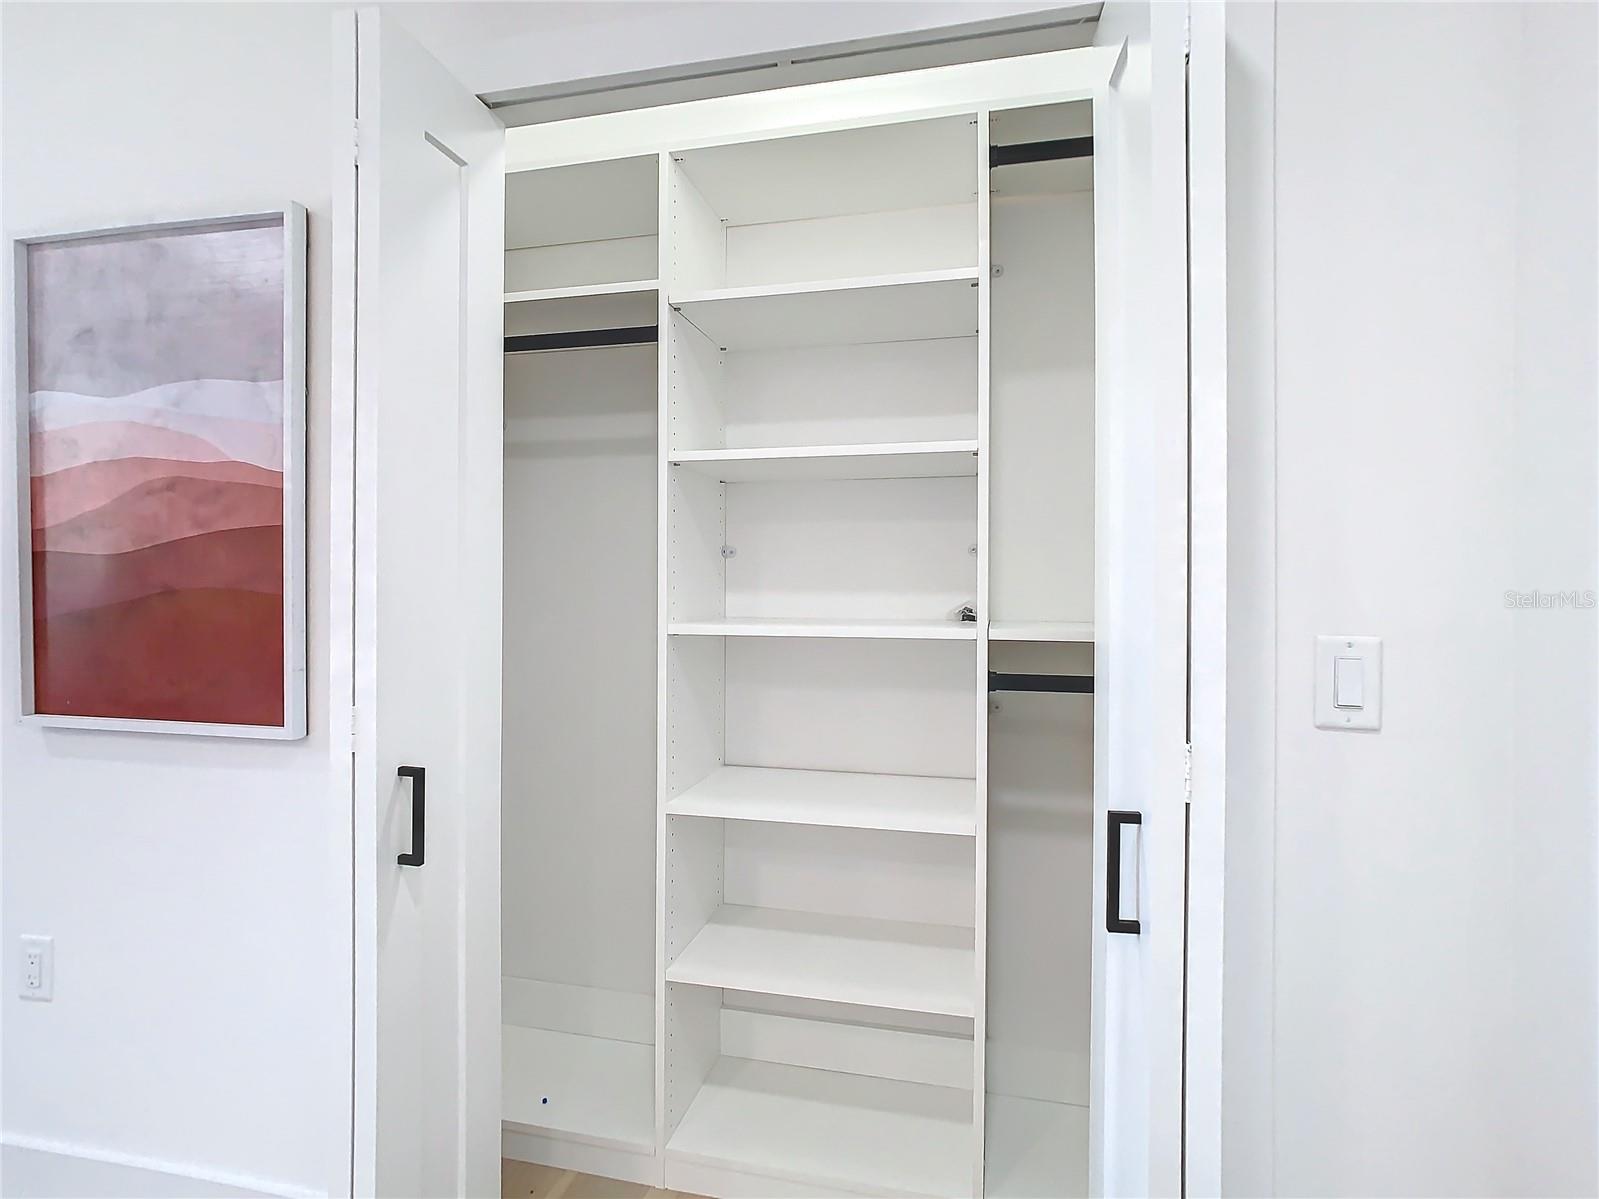 Built in Closet Shelving in every closet